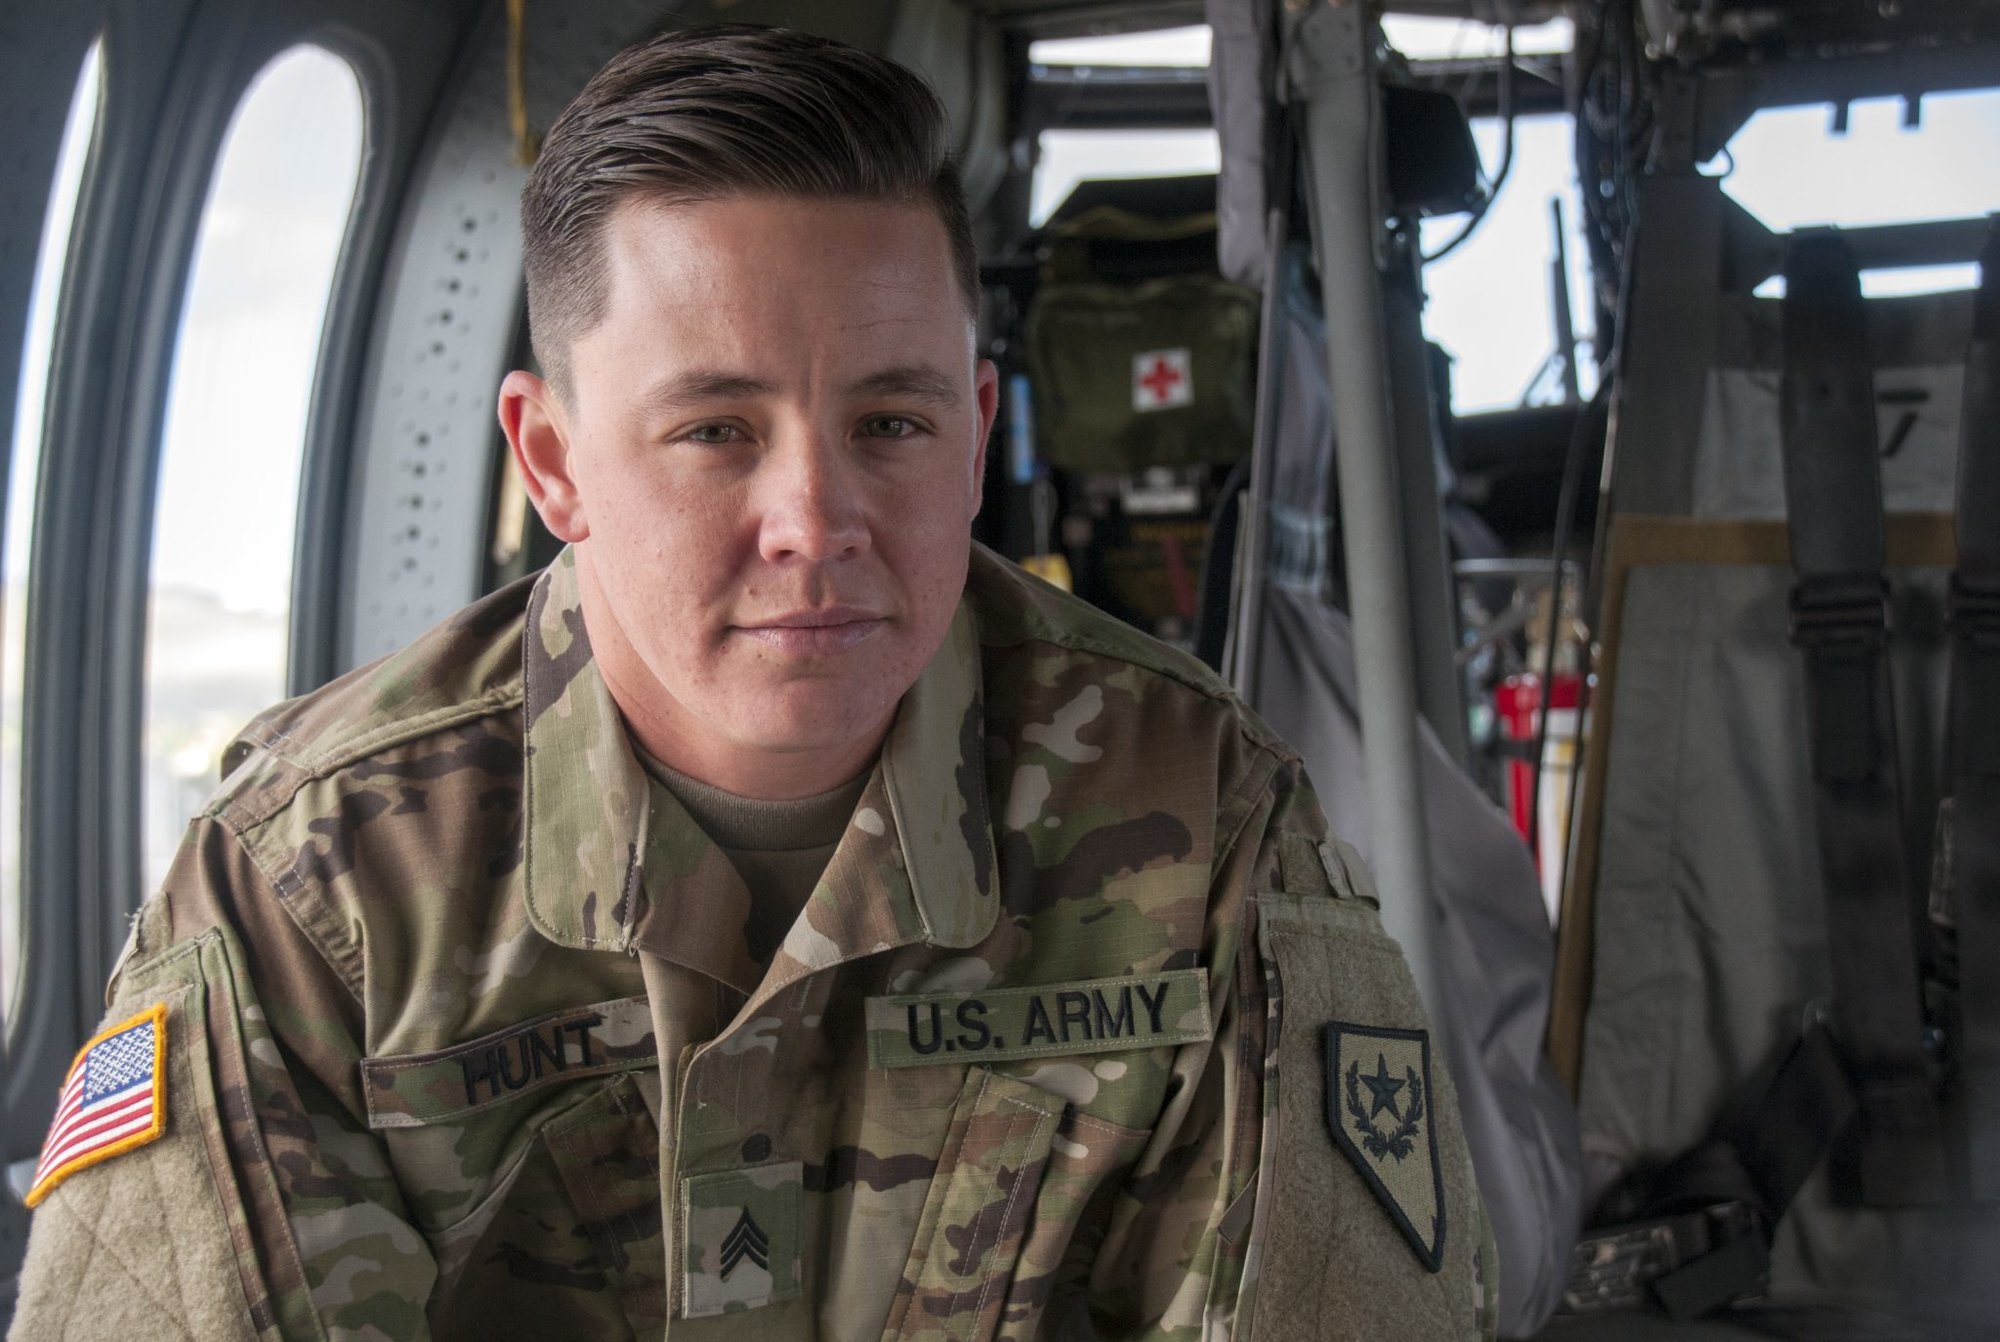 Nevada Army National Guard Sgt. Sam Hunt, an electrician with G Company, 2/238th General Support Aviation Battalion, on the flight line at the Army Aviation Support Facility in Stead, Nev., May 12, 2017. Hunt is the first openly transgender soldier of the Nevada National Guard.